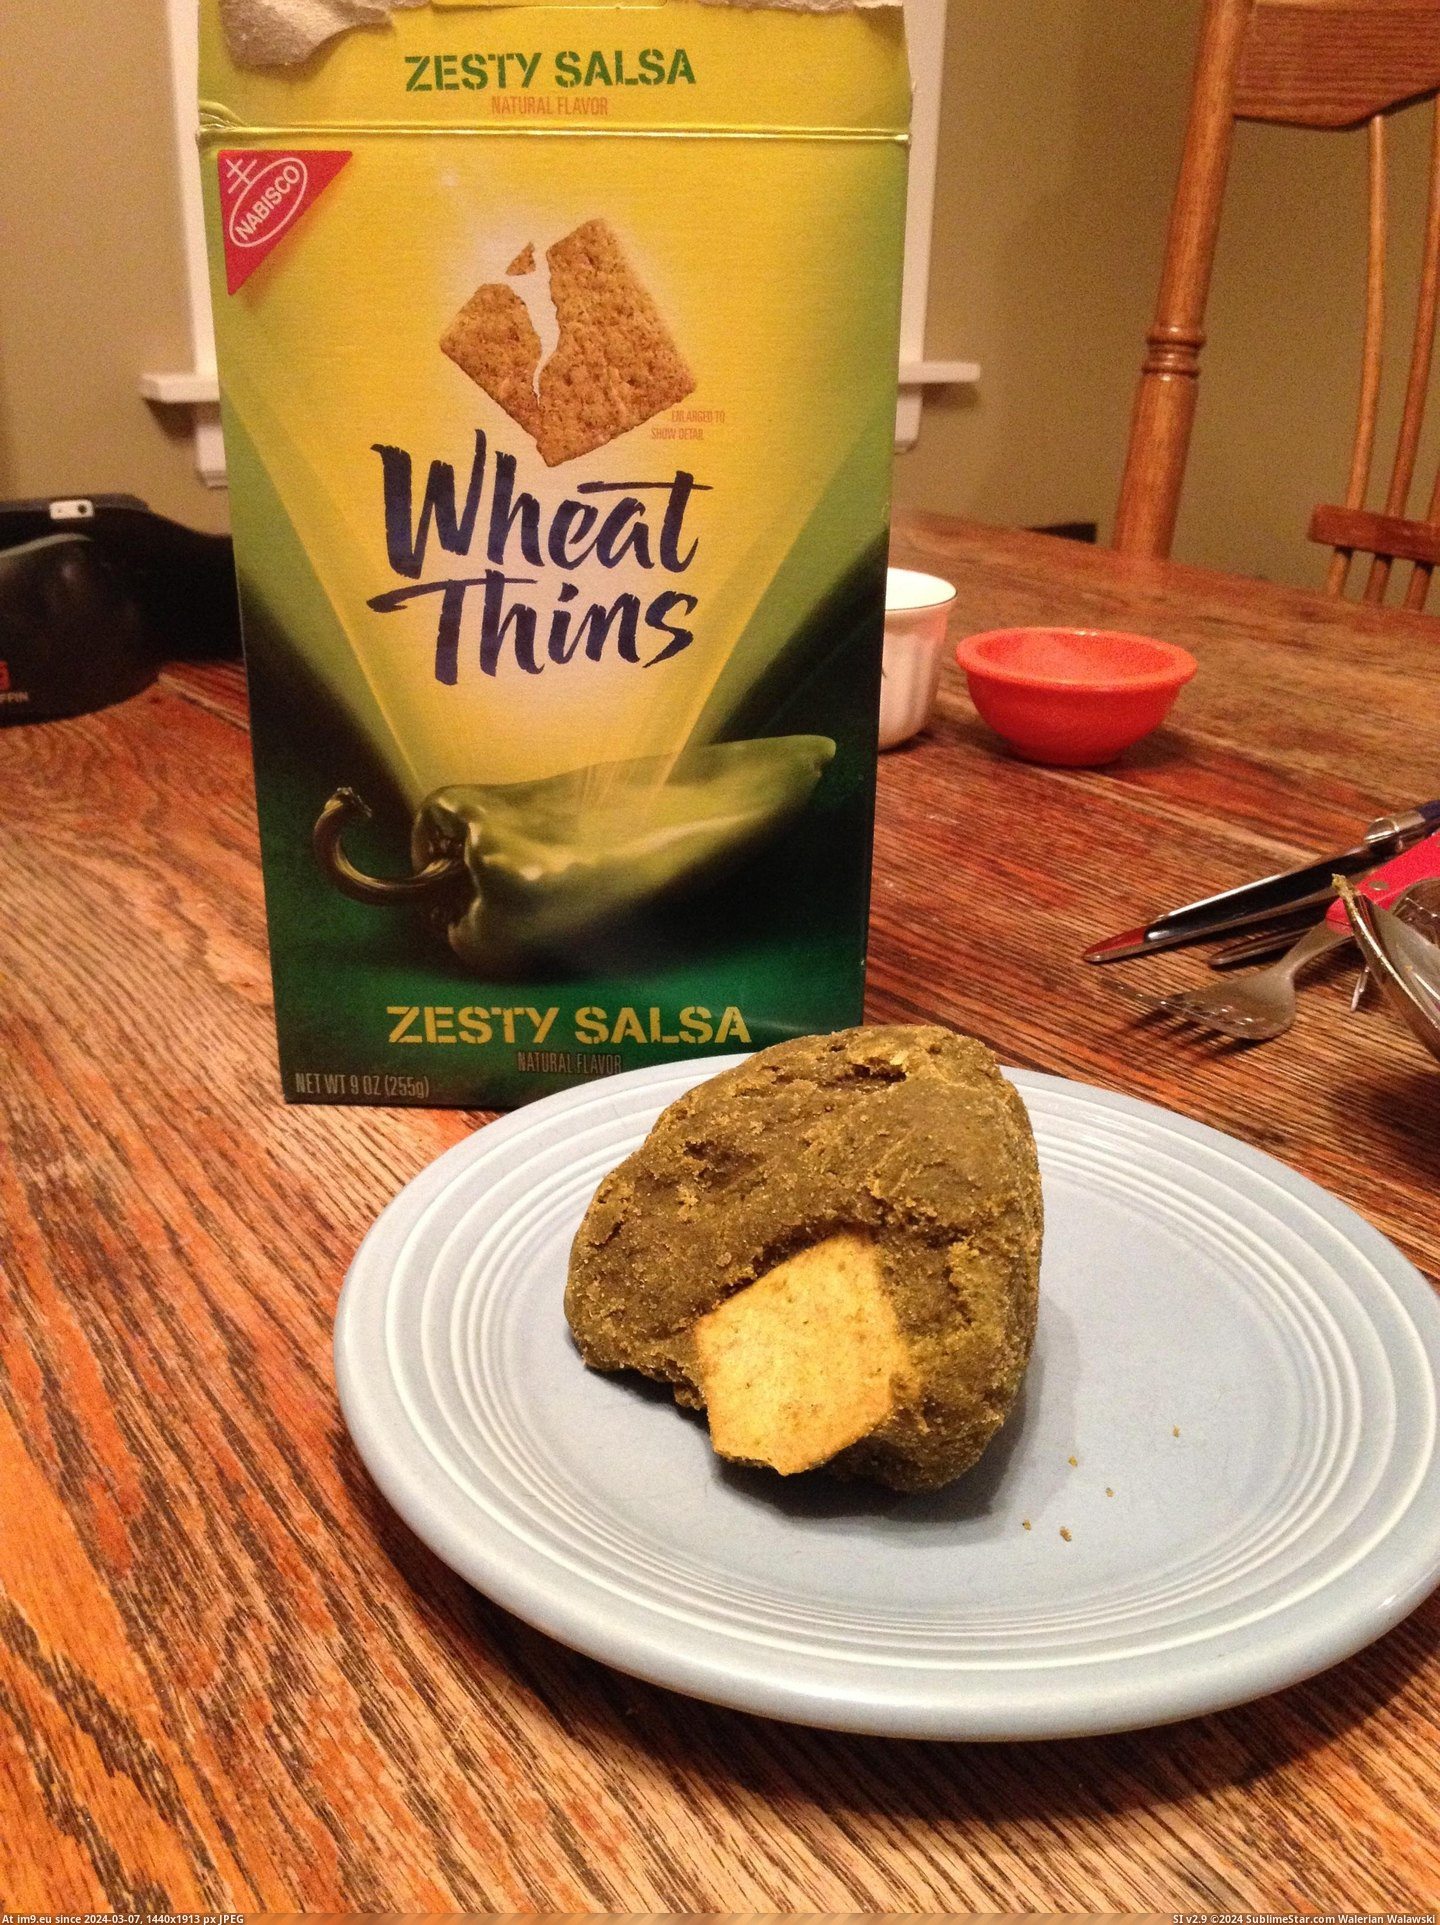 #Wtf #Box #Thins #Wheat #Prize [Wtf] Look at the 'prize' I found in this box of Wheat Thins Pic. (Изображение из альбом My r/WTF favs))